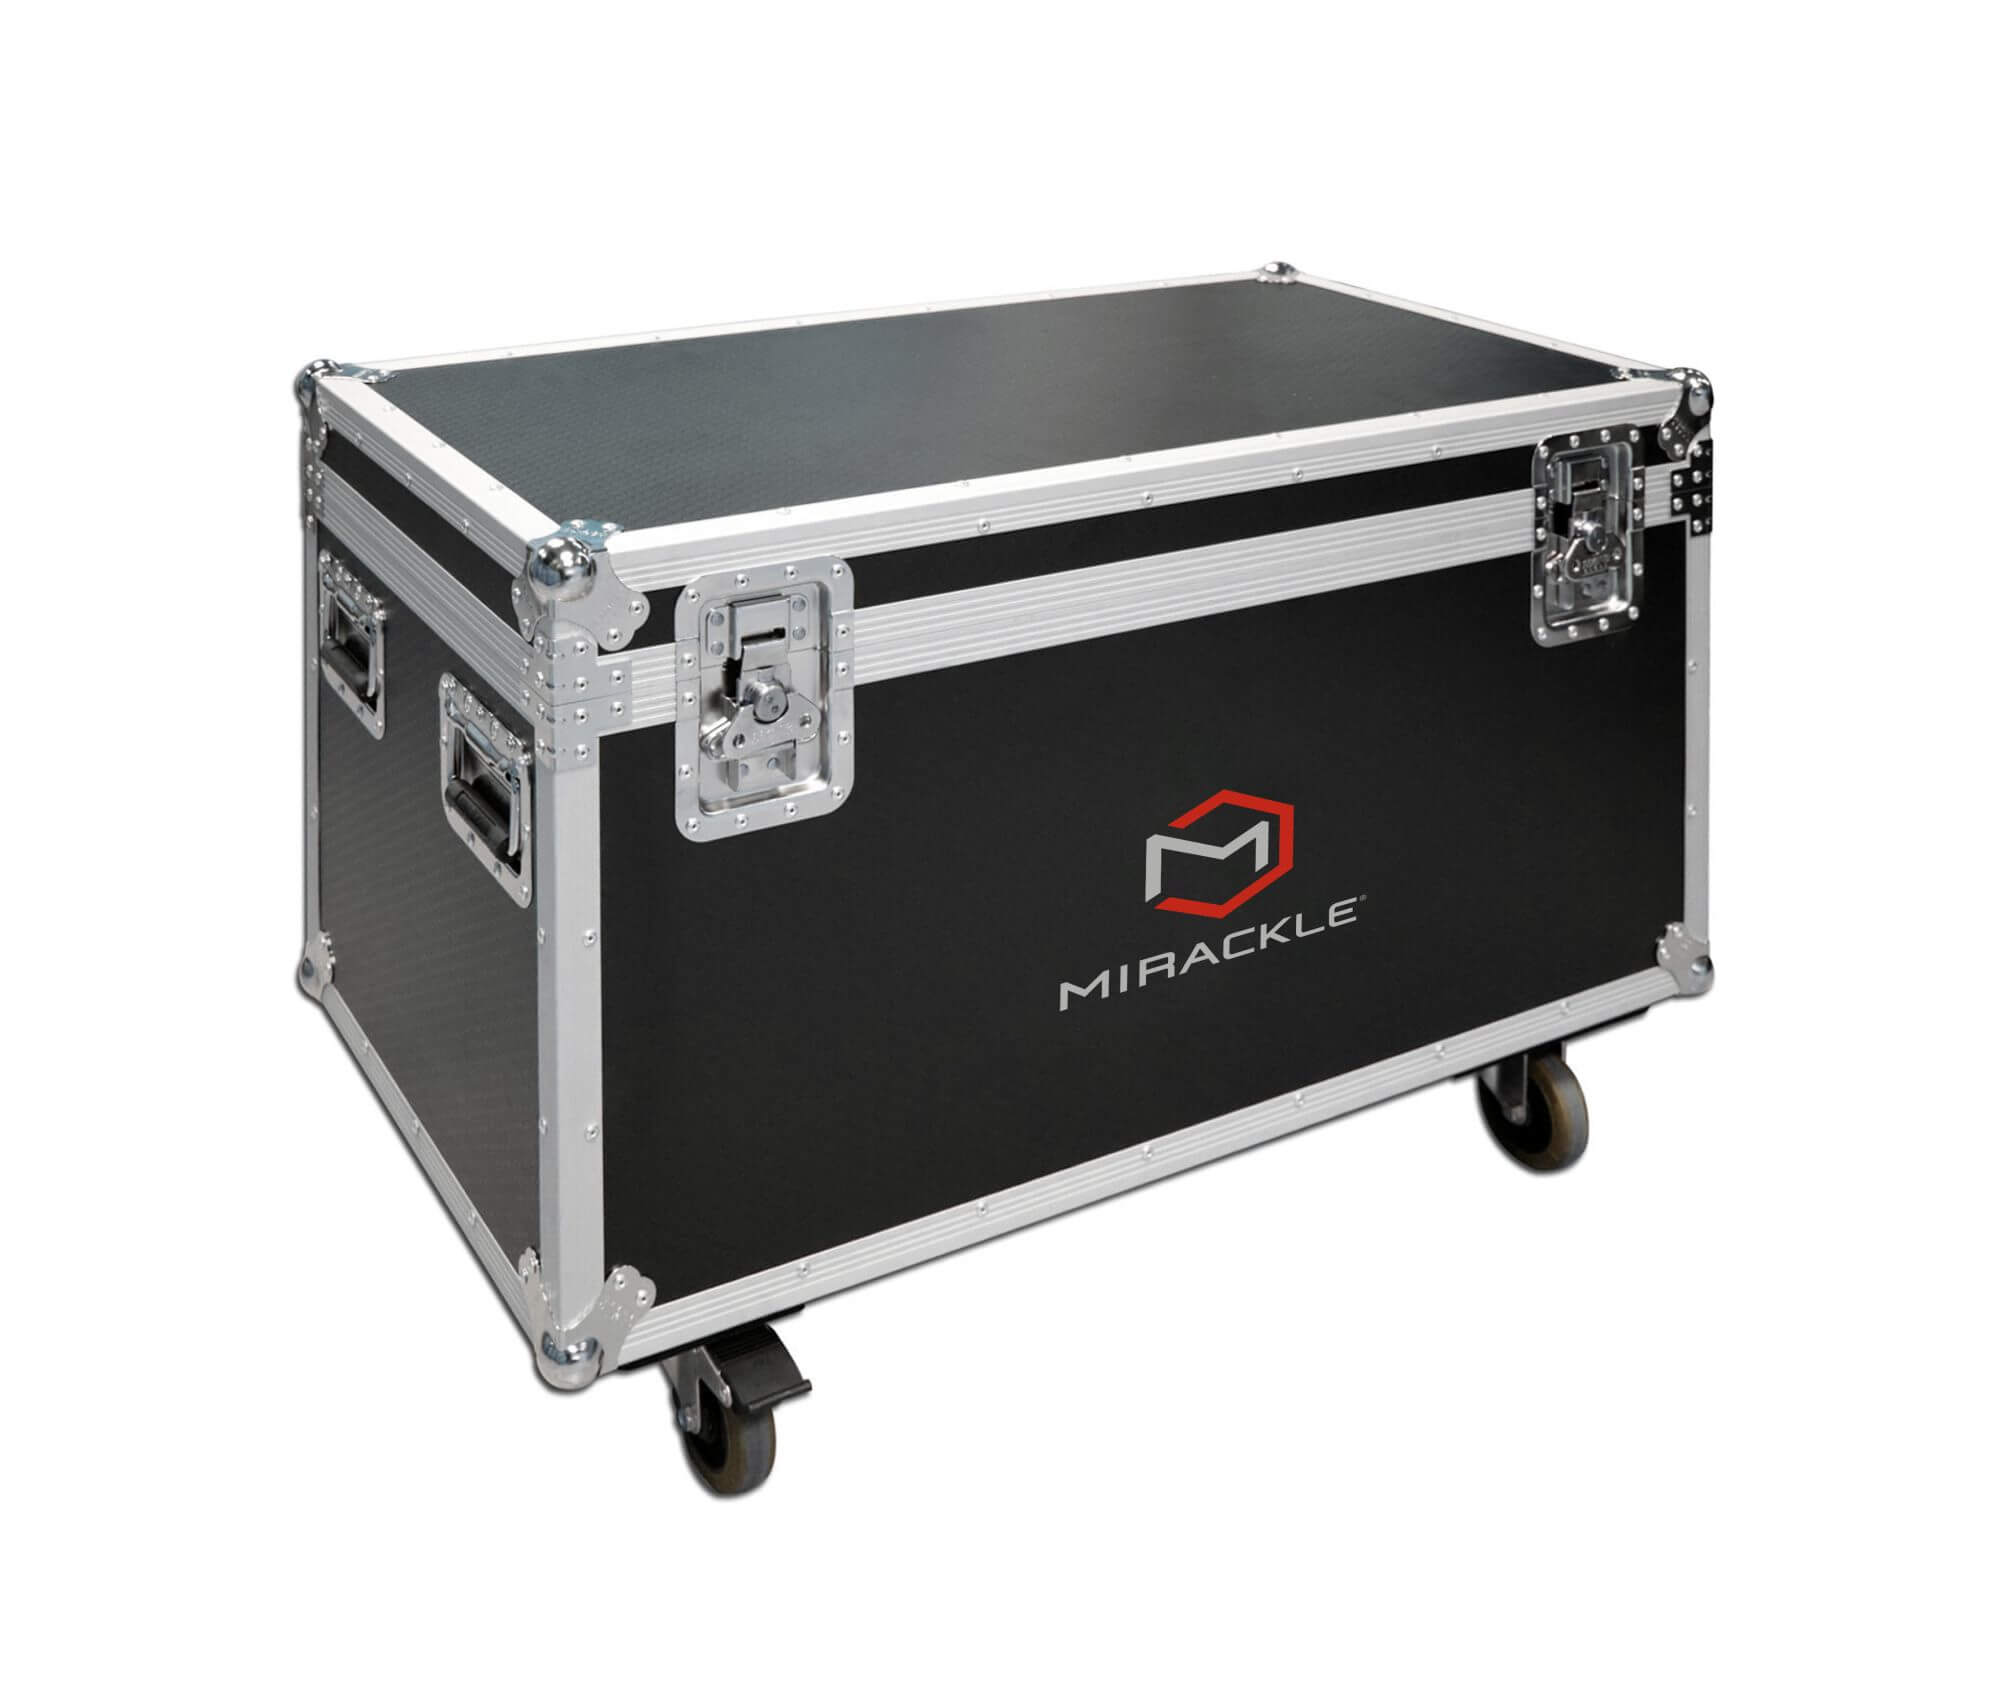 Picture of a LED video wall flight case